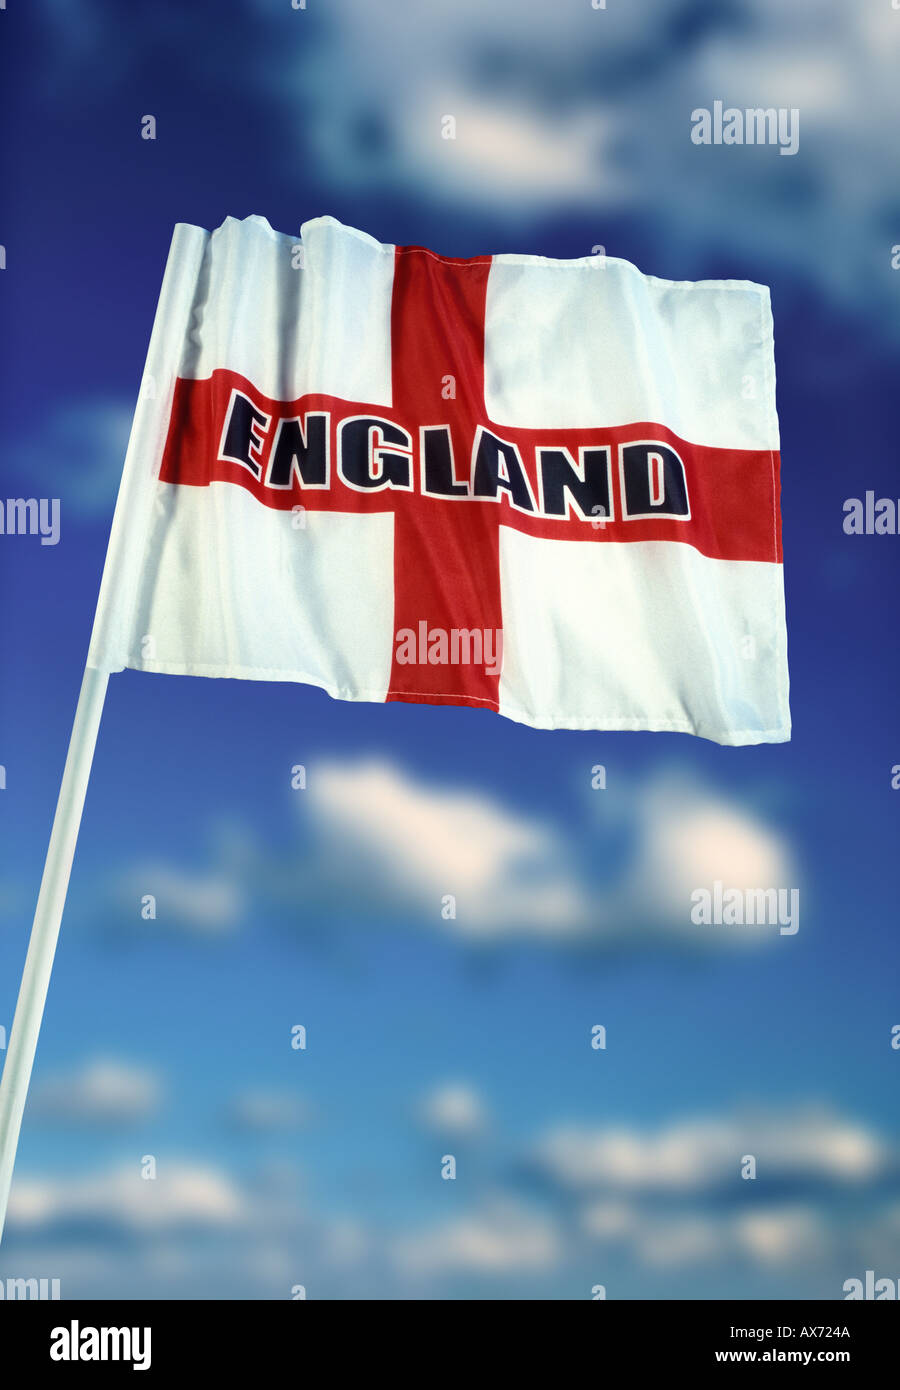 English flag of Saint George with England logo and blue sky white cloud background Stock Photo